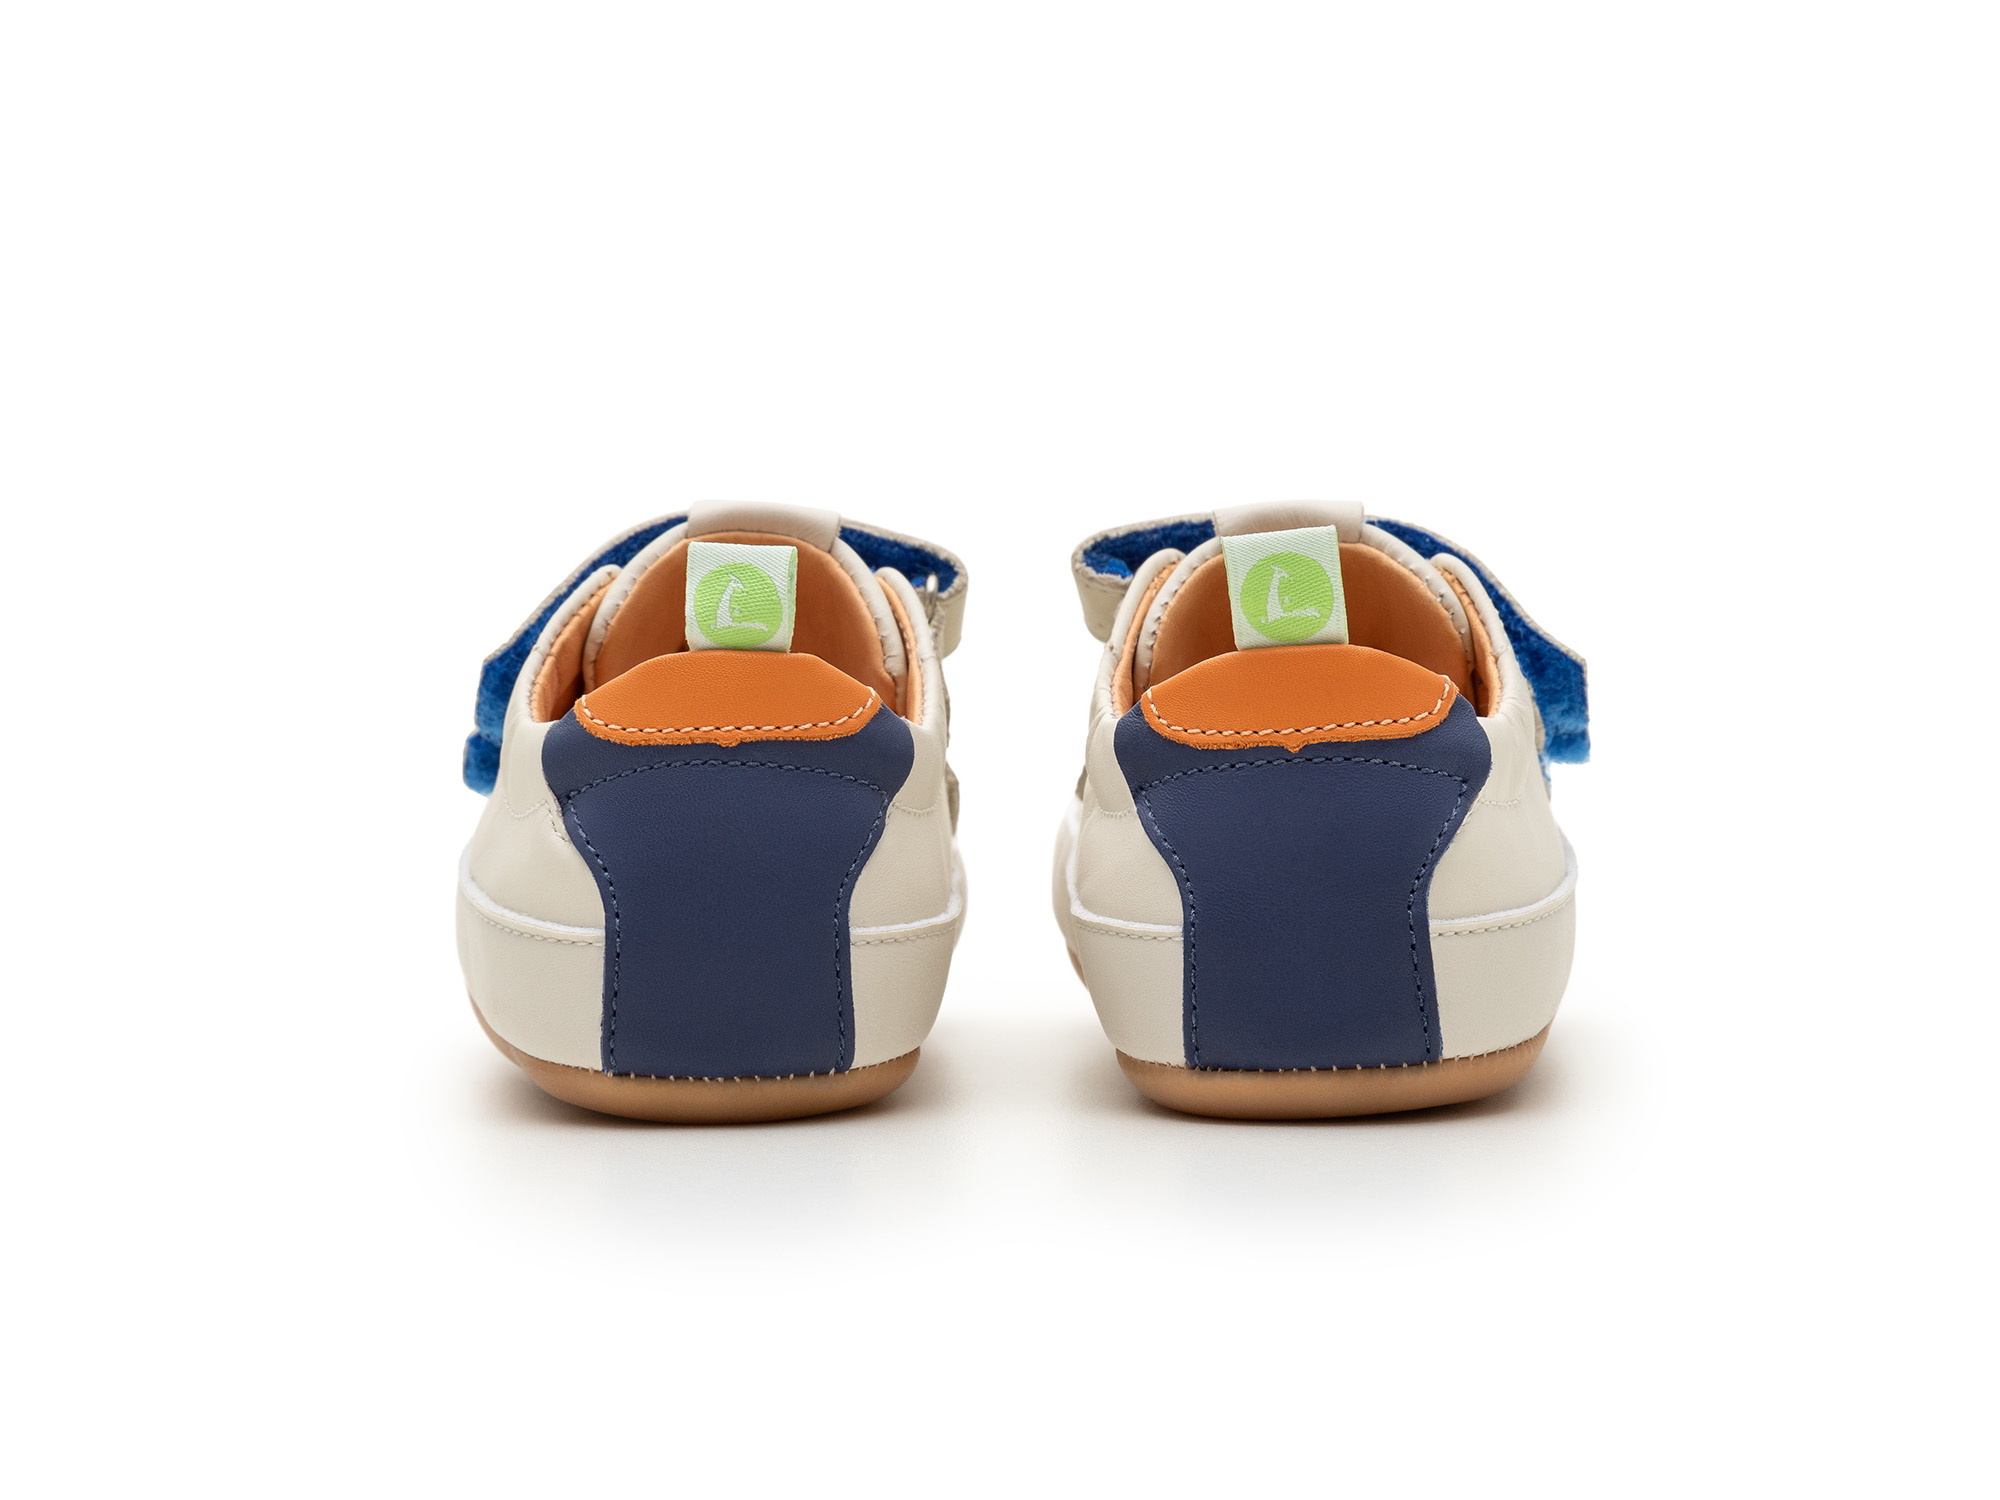 UP & GO Sneakers for Boys Bossy Play | Tip Toey Joey - Australia - 5